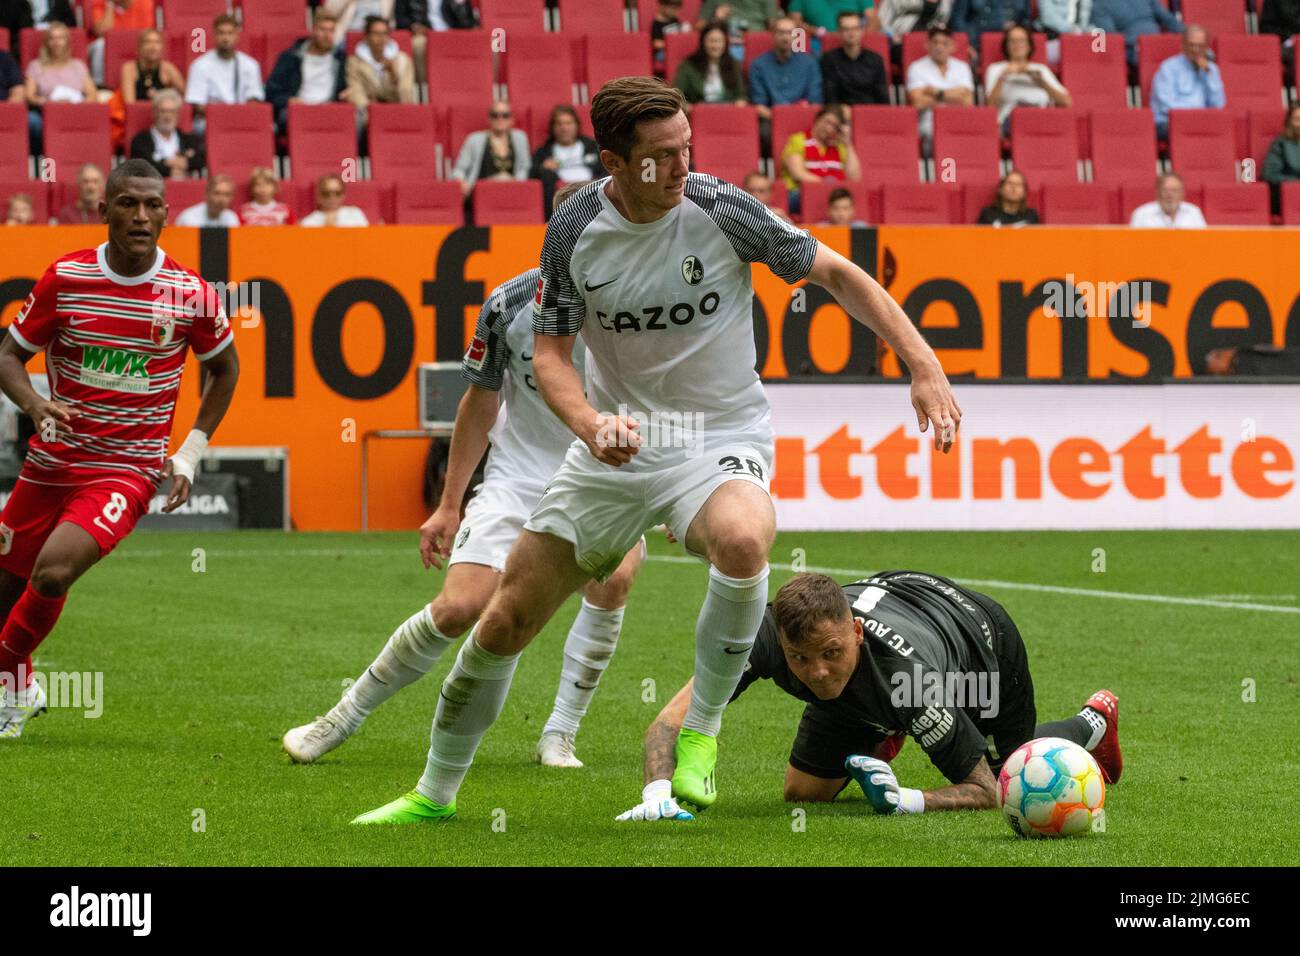 06 August 2022, Bavaria, Augsburg: Soccer, Bundesliga, FC Augsburg - SC Freiburg, Matchday 1, WWK-Arena. Augsburg goalkeeper Rafal Gikiewicz (r) can only look behind Freiburg's Michael Gregoritsch. Photo: Stefan Puchner/dpa - IMPORTANT NOTE: In accordance with the requirements of the DFL Deutsche Fußball Liga and the DFB Deutscher Fußball-Bund, it is prohibited to use or have used photographs taken in the stadium and/or of the match in the form of sequence pictures and/or video-like photo series. Stock Photo